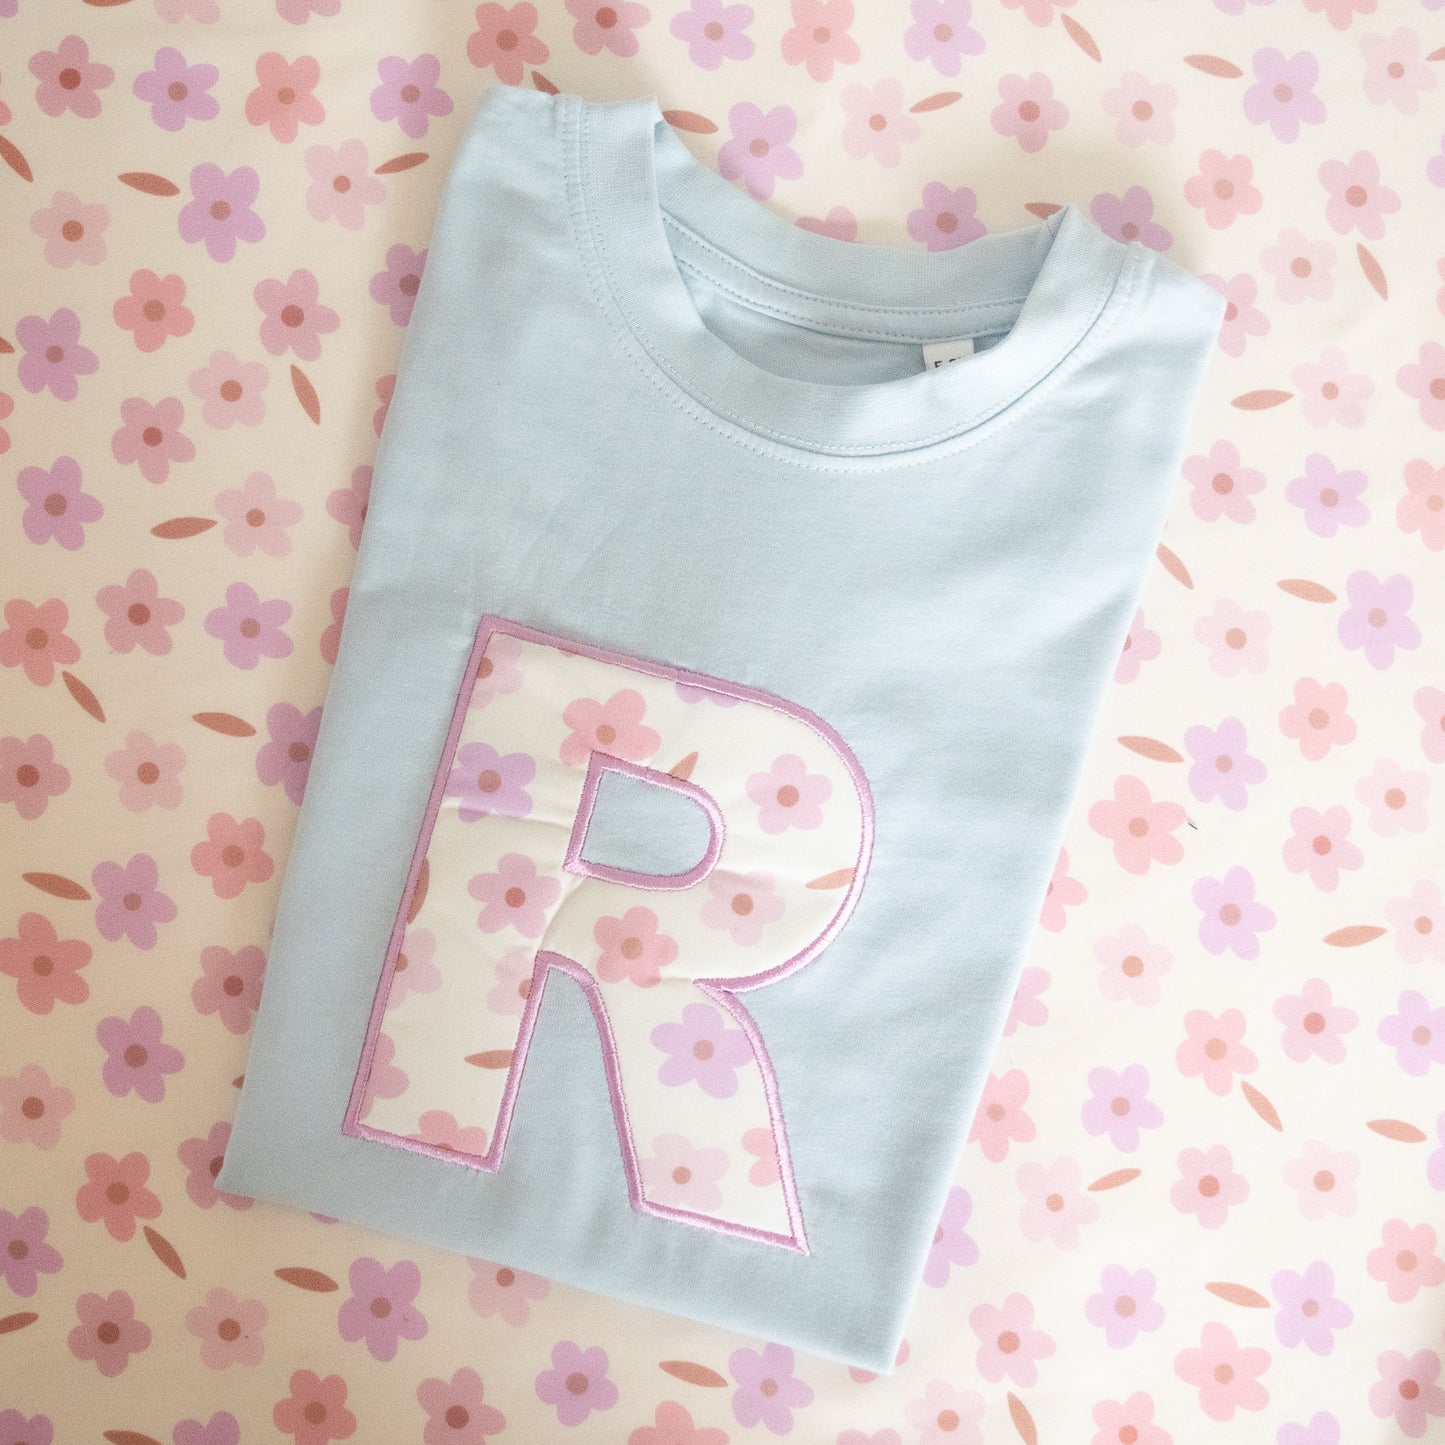 Personalised initial or age tshirt - little flower